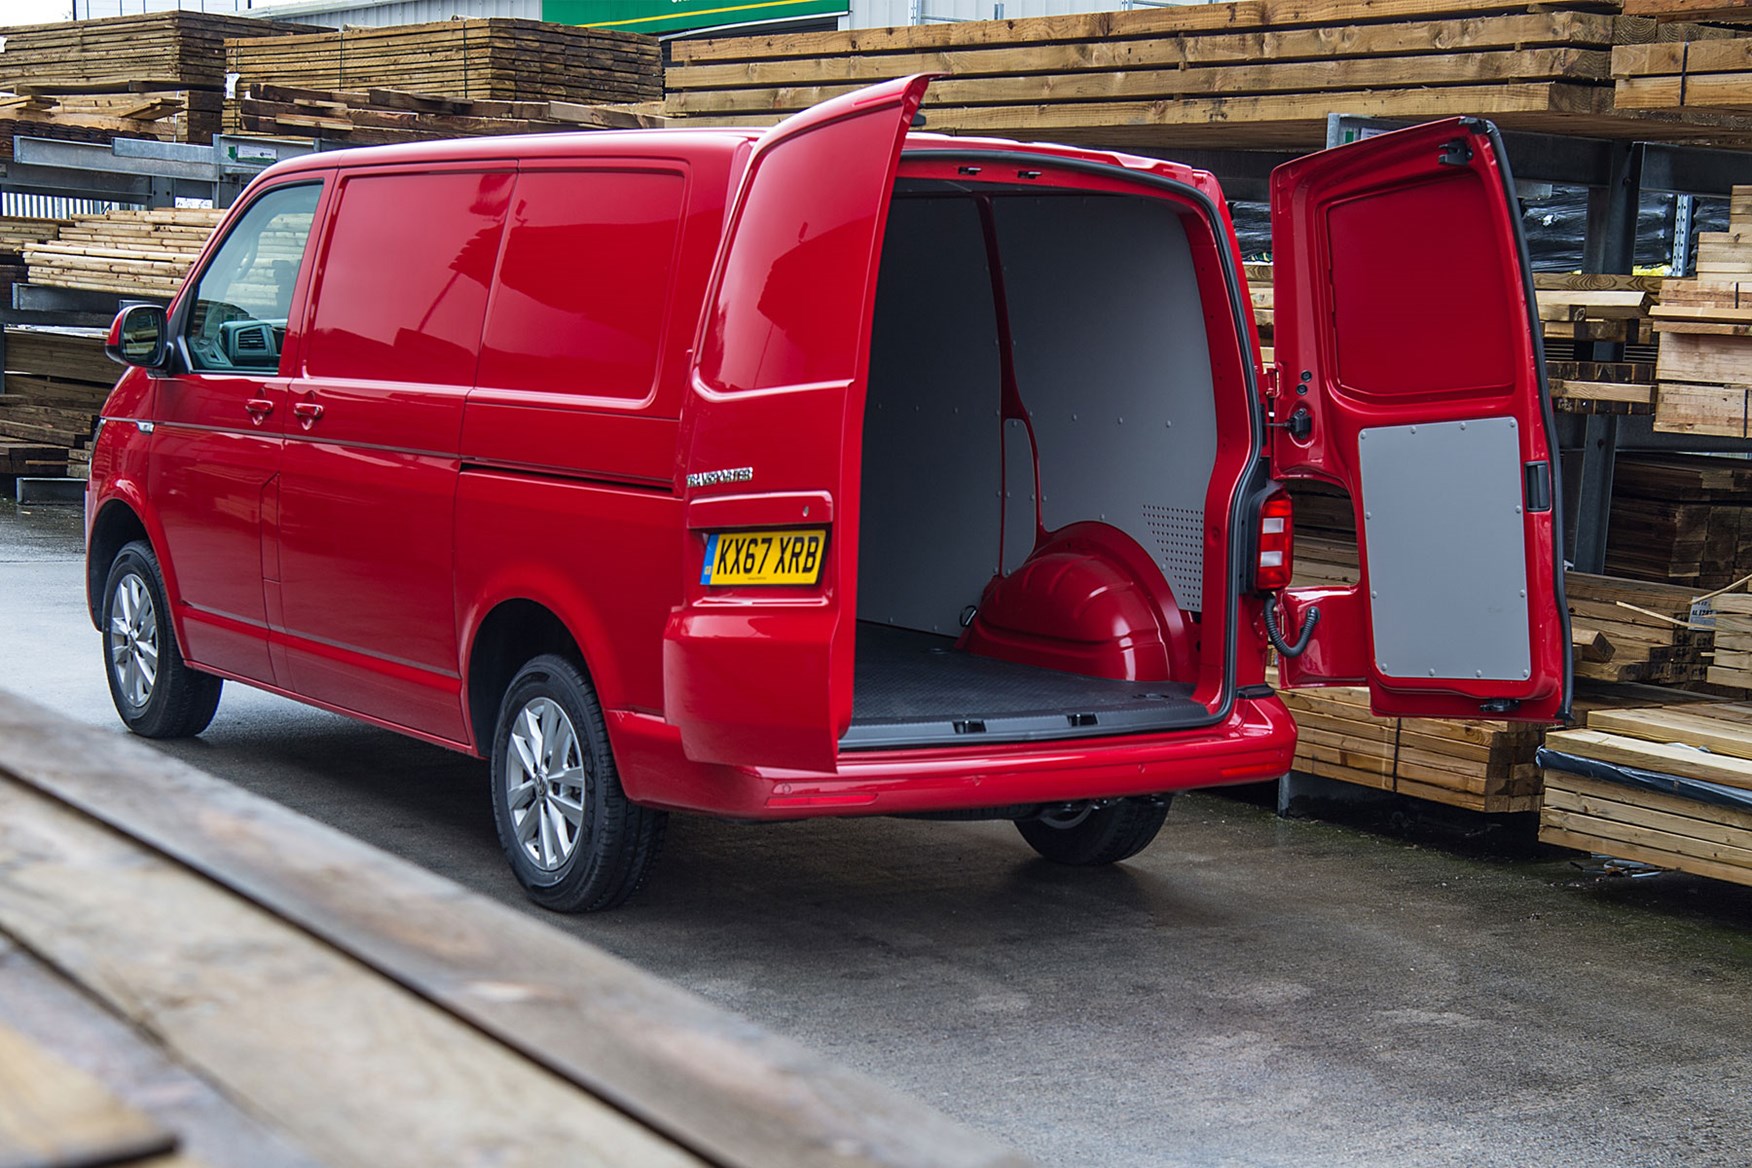 VW Transporter (2015-on) load area dimensions